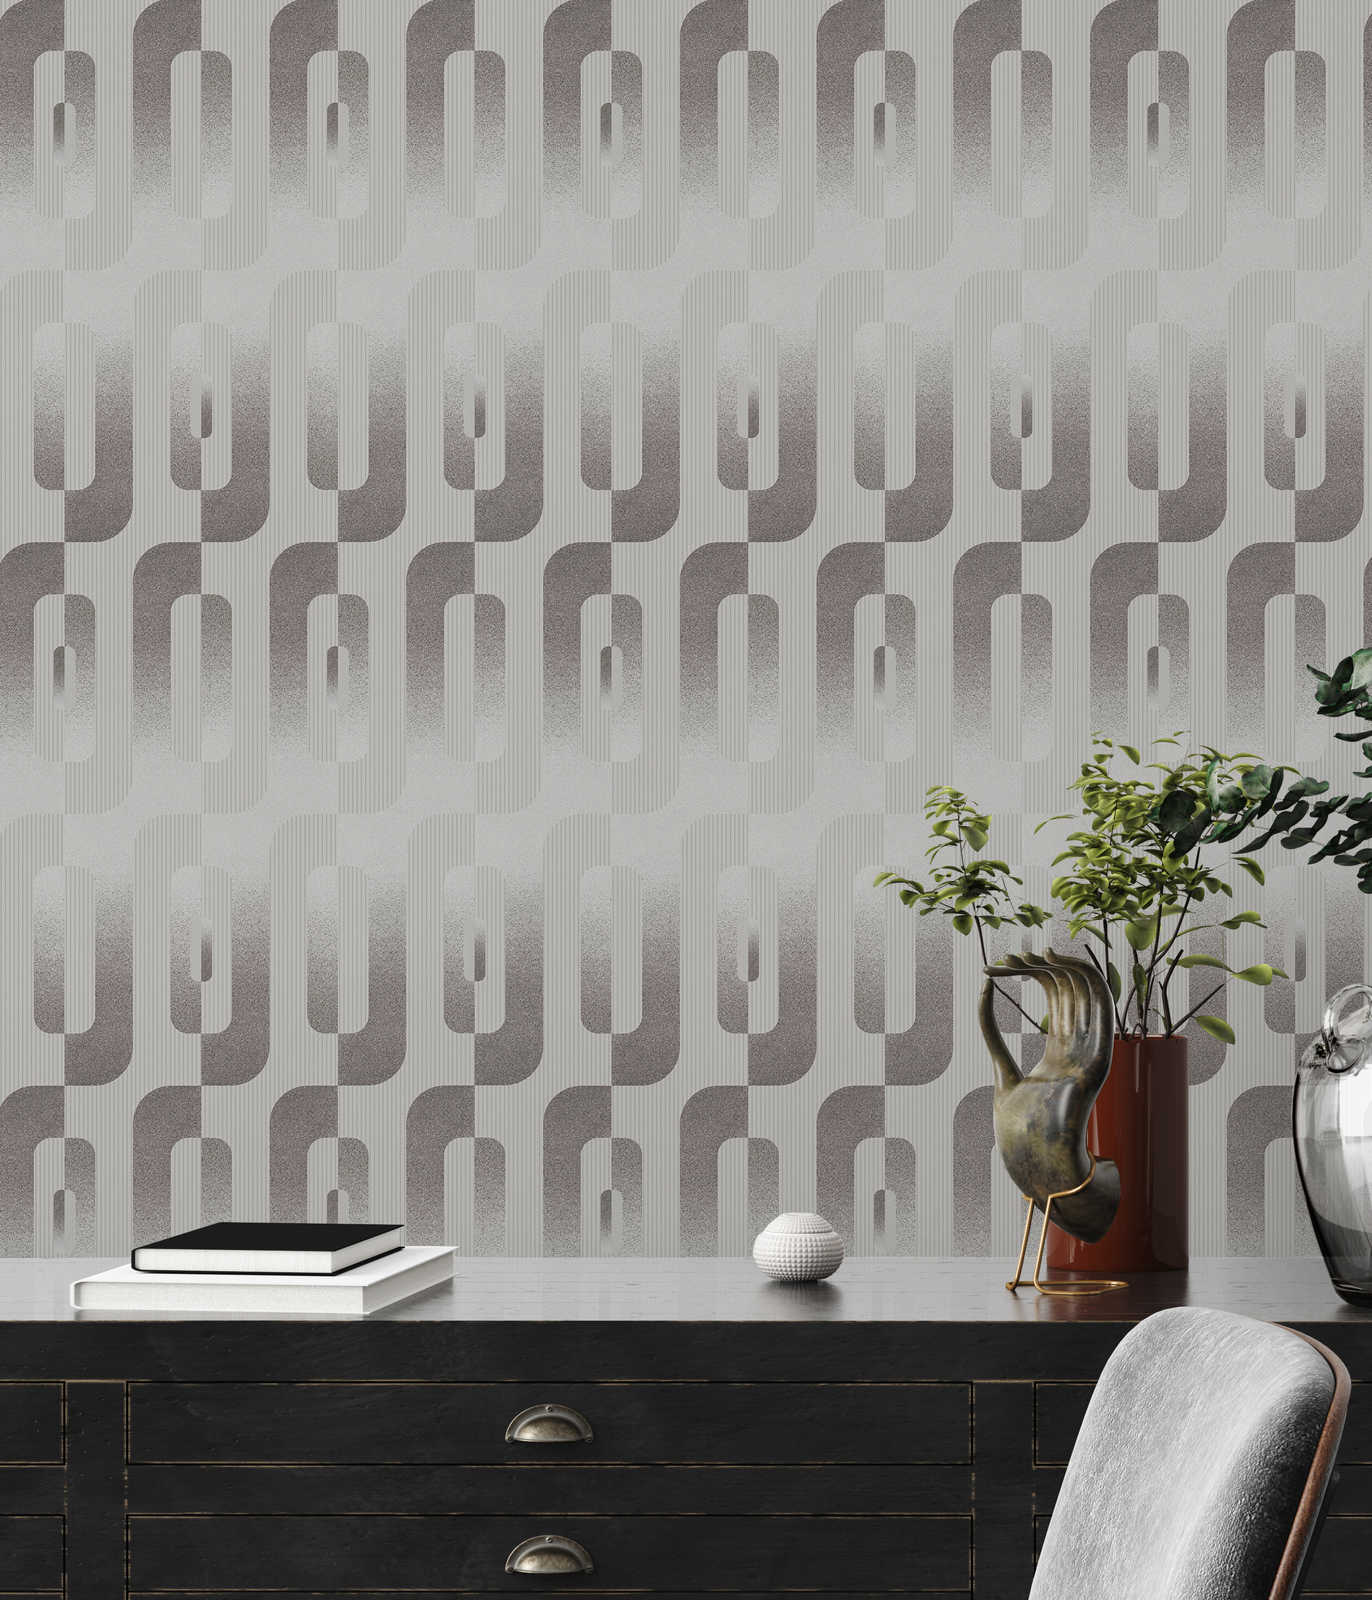             Graphic wallpaper with Reto pattern in grey and silver
        